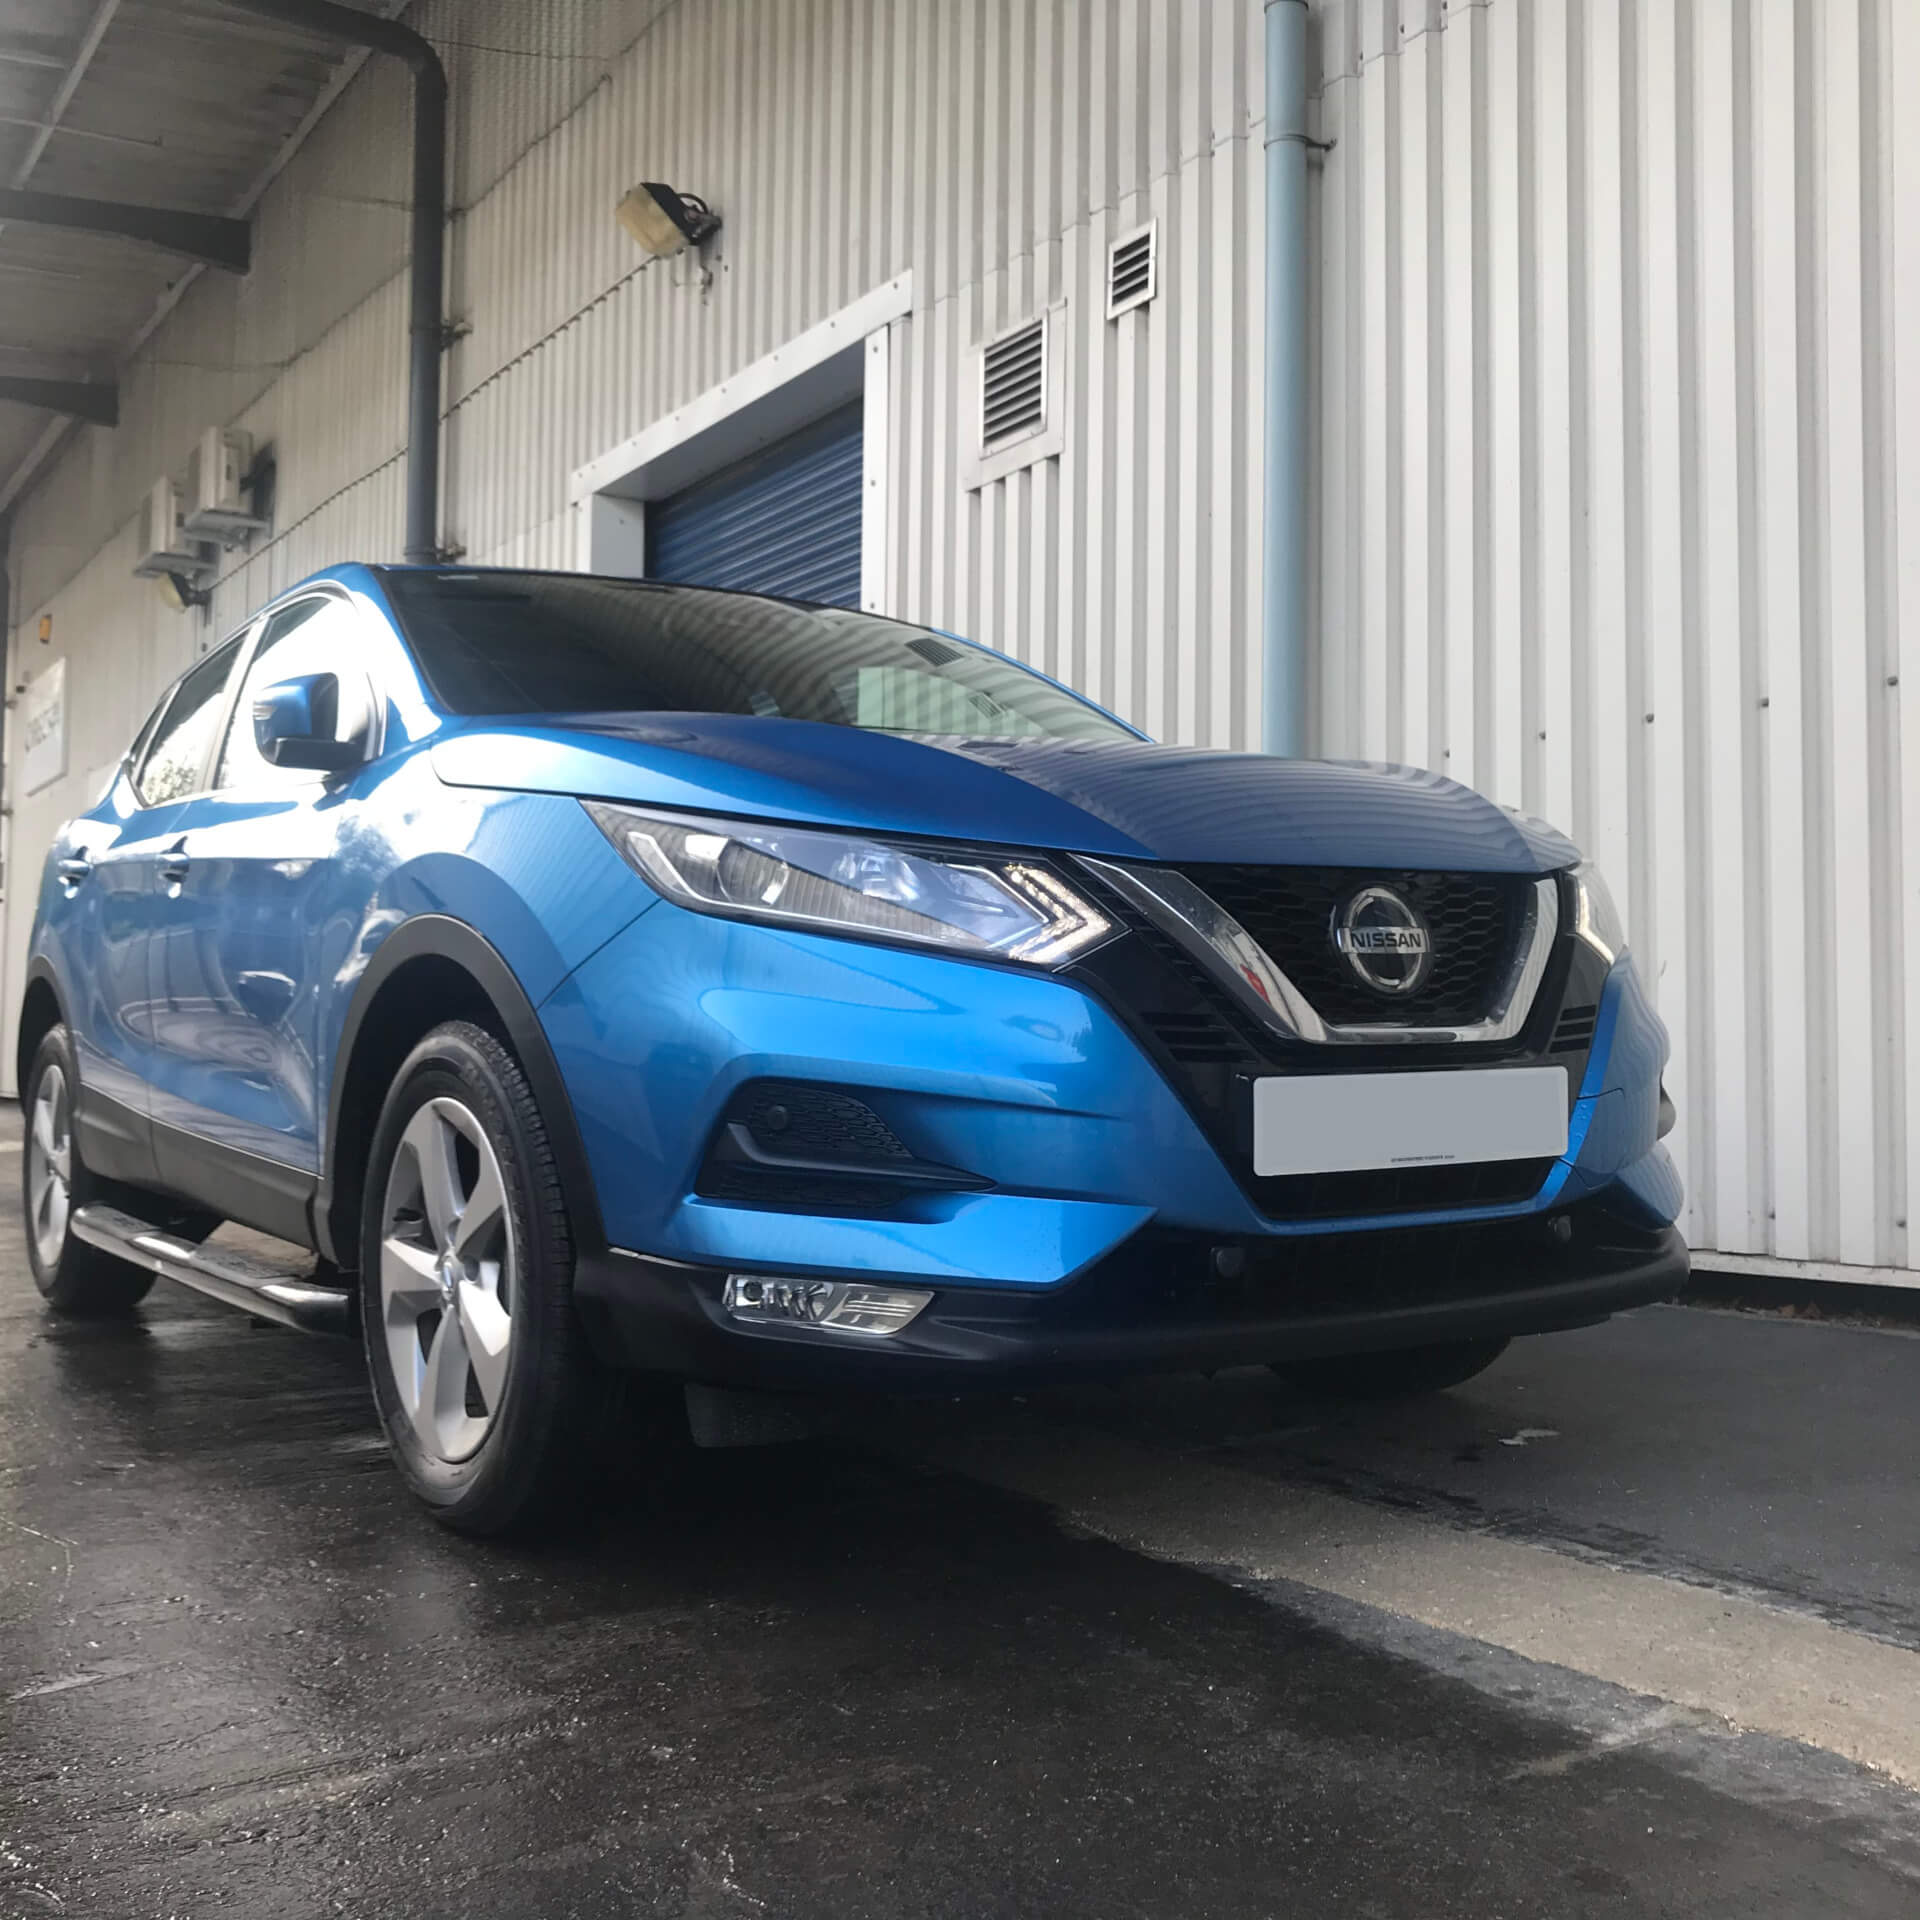 Direct4x4 accessories for Nissan Qashqai vehicles with a photo of a blue Nissan Qashqai parked outside our offices